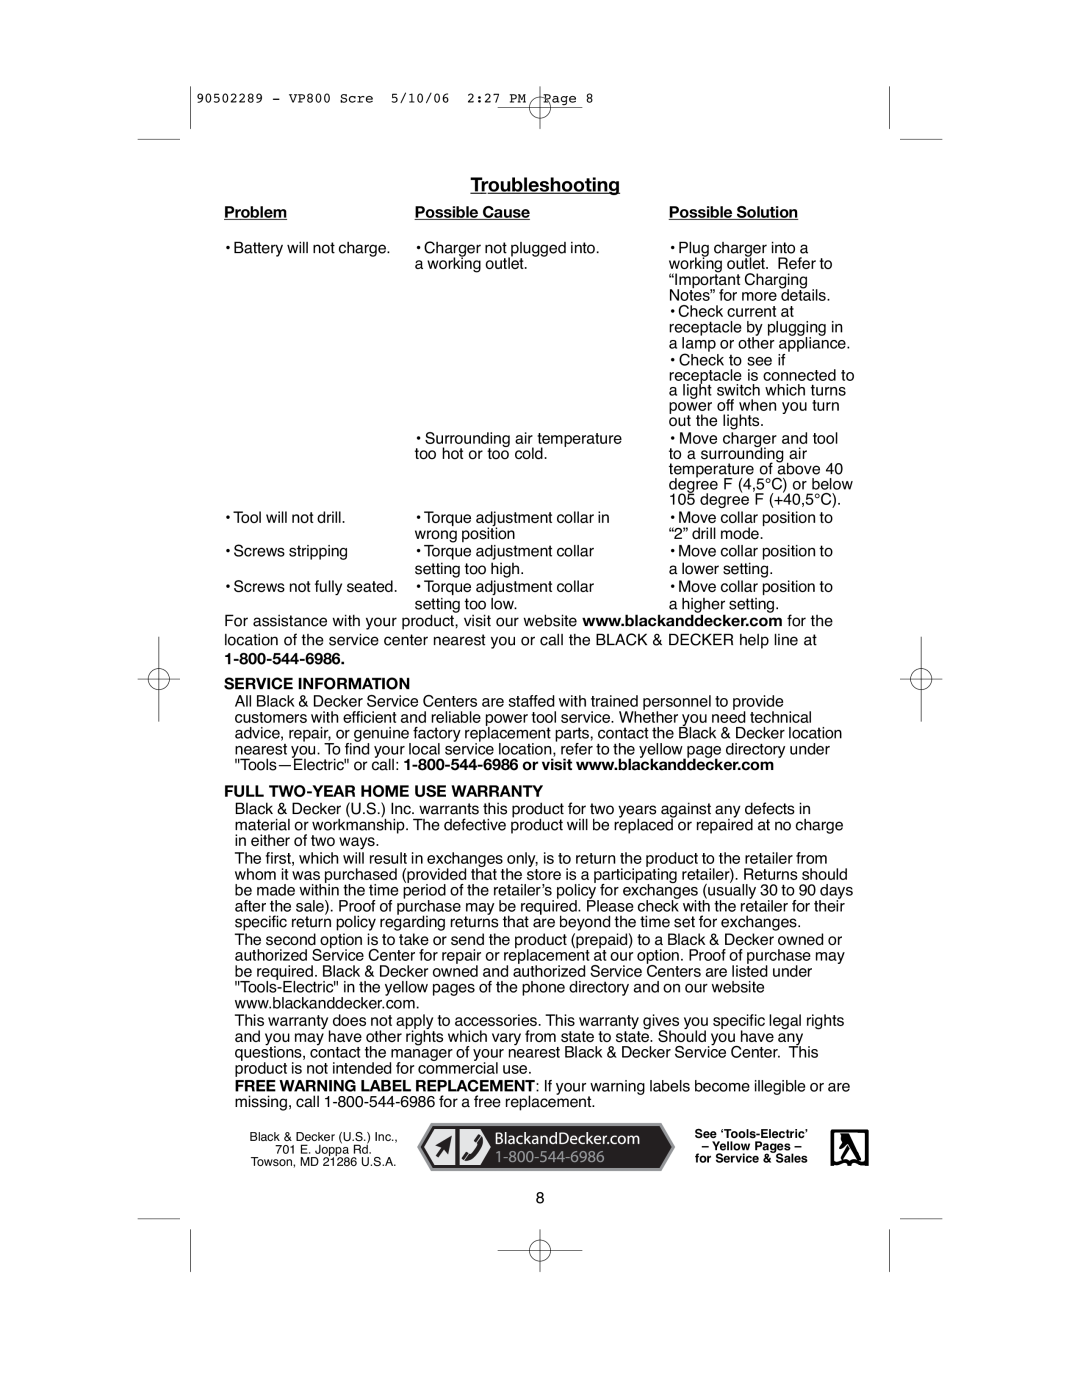 Black & Decker VP800 instruction manual Troubleshooting, Problem, Possible Cause, Possible Solution, Service Information 